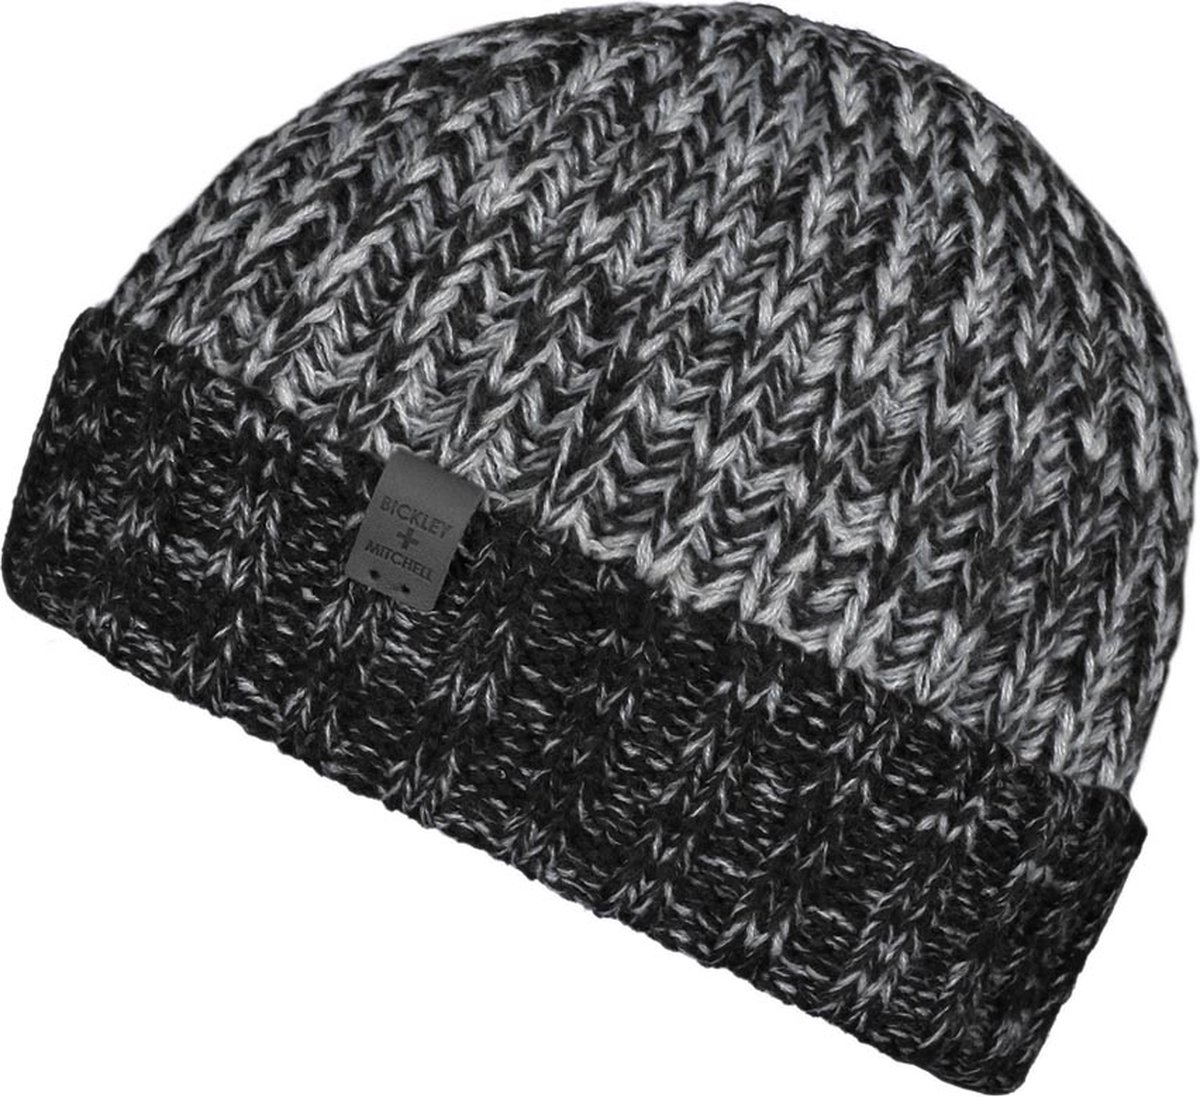 1056-01-8 Twisted Color Beanie Q3-22